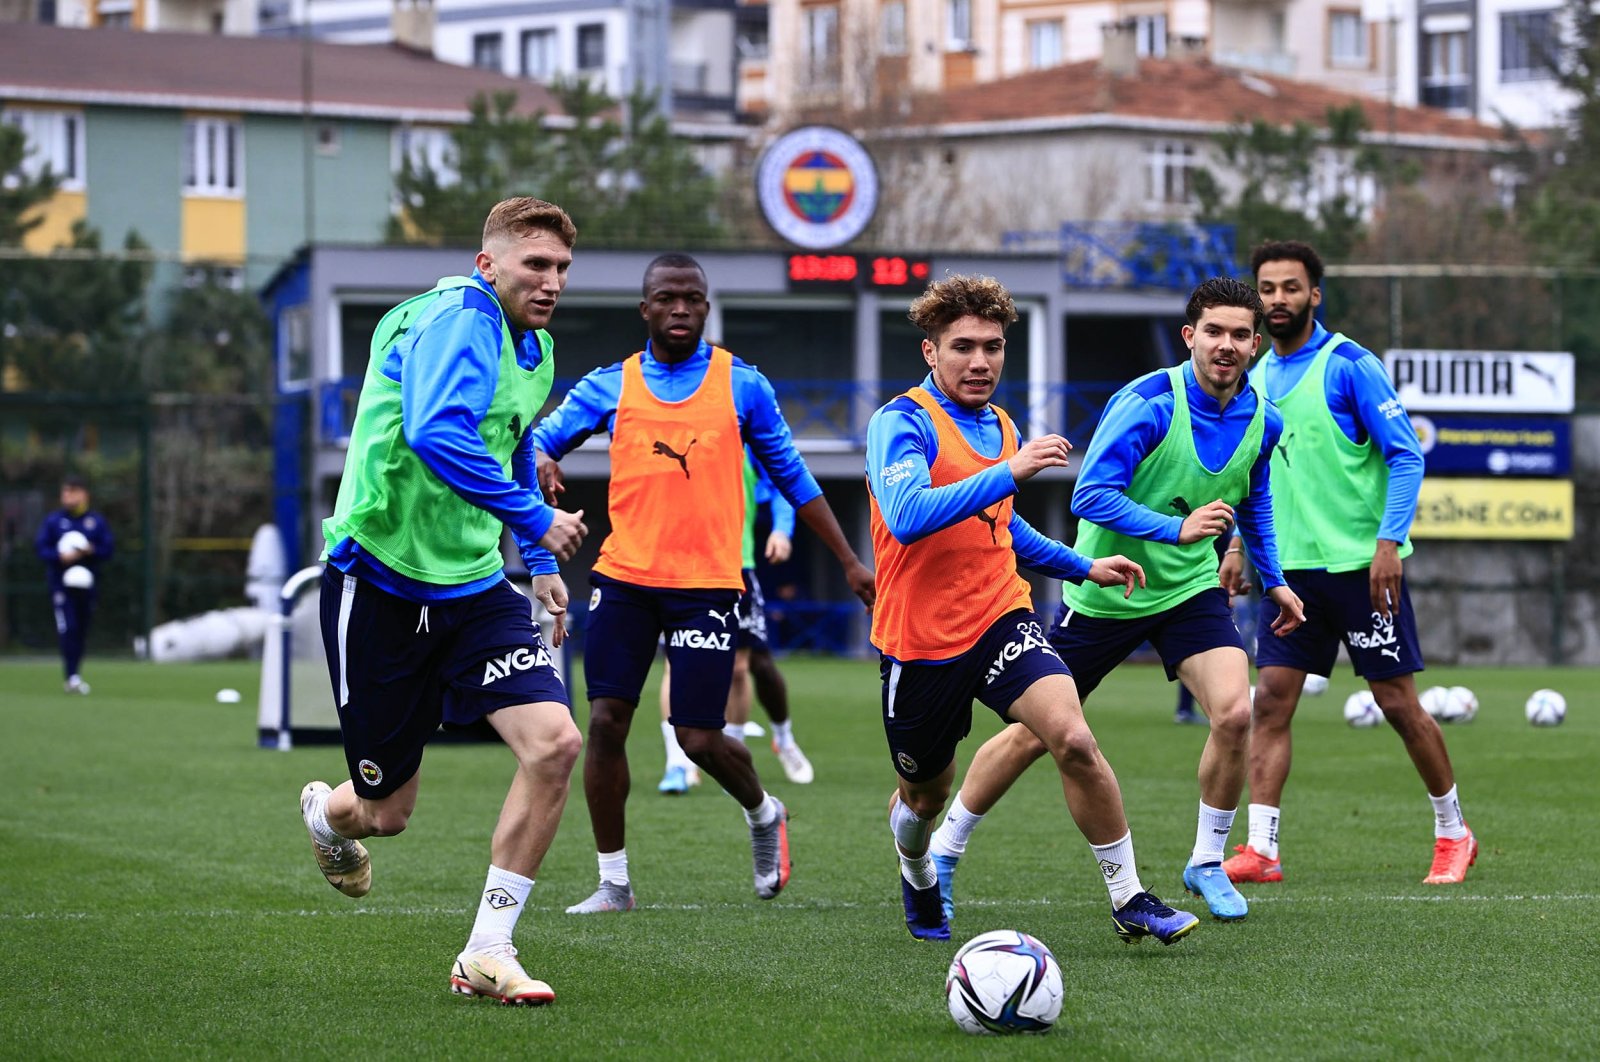 Fenerbahçe players are seen during a training session, in Istanbul, Turkey, April 5, 2022. (DHA Photo)